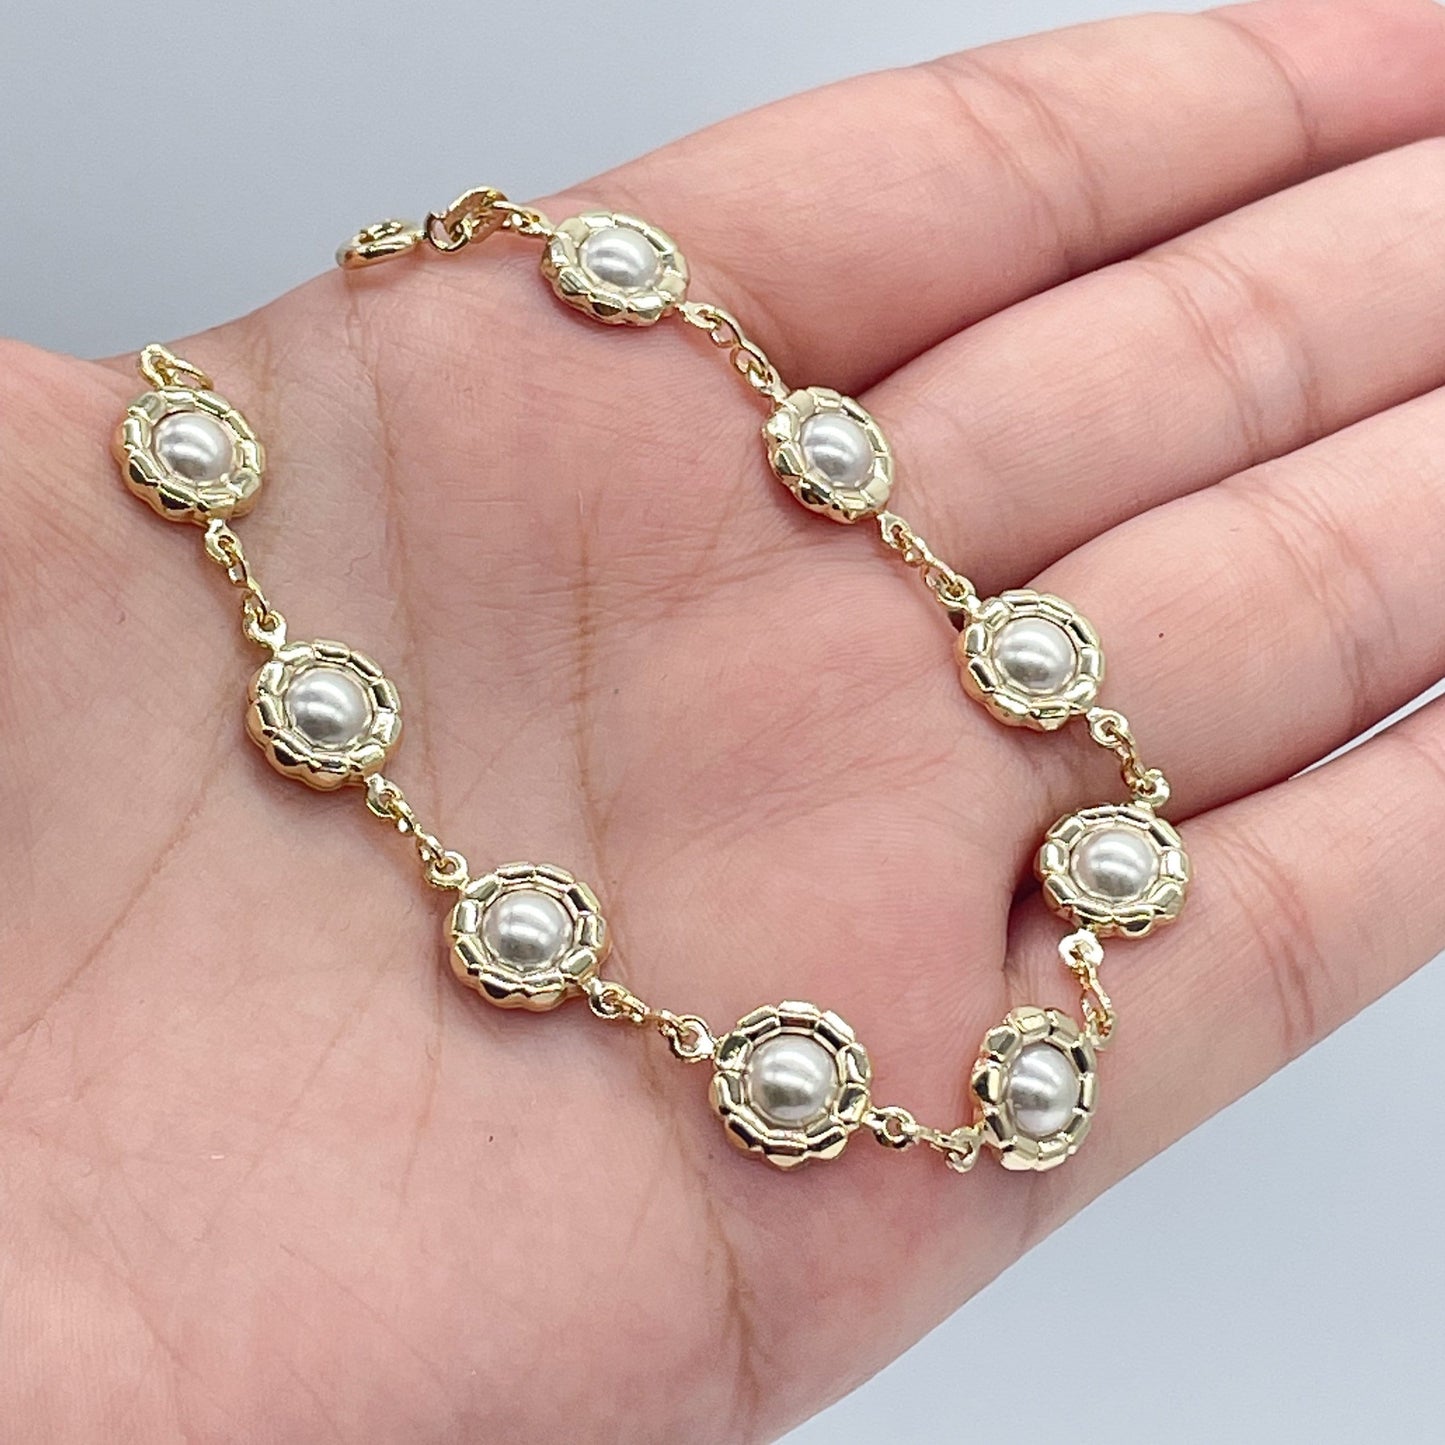 18k Gold Layered Bracelet With Embedded Simulated Pearls Wholesale Jewelry